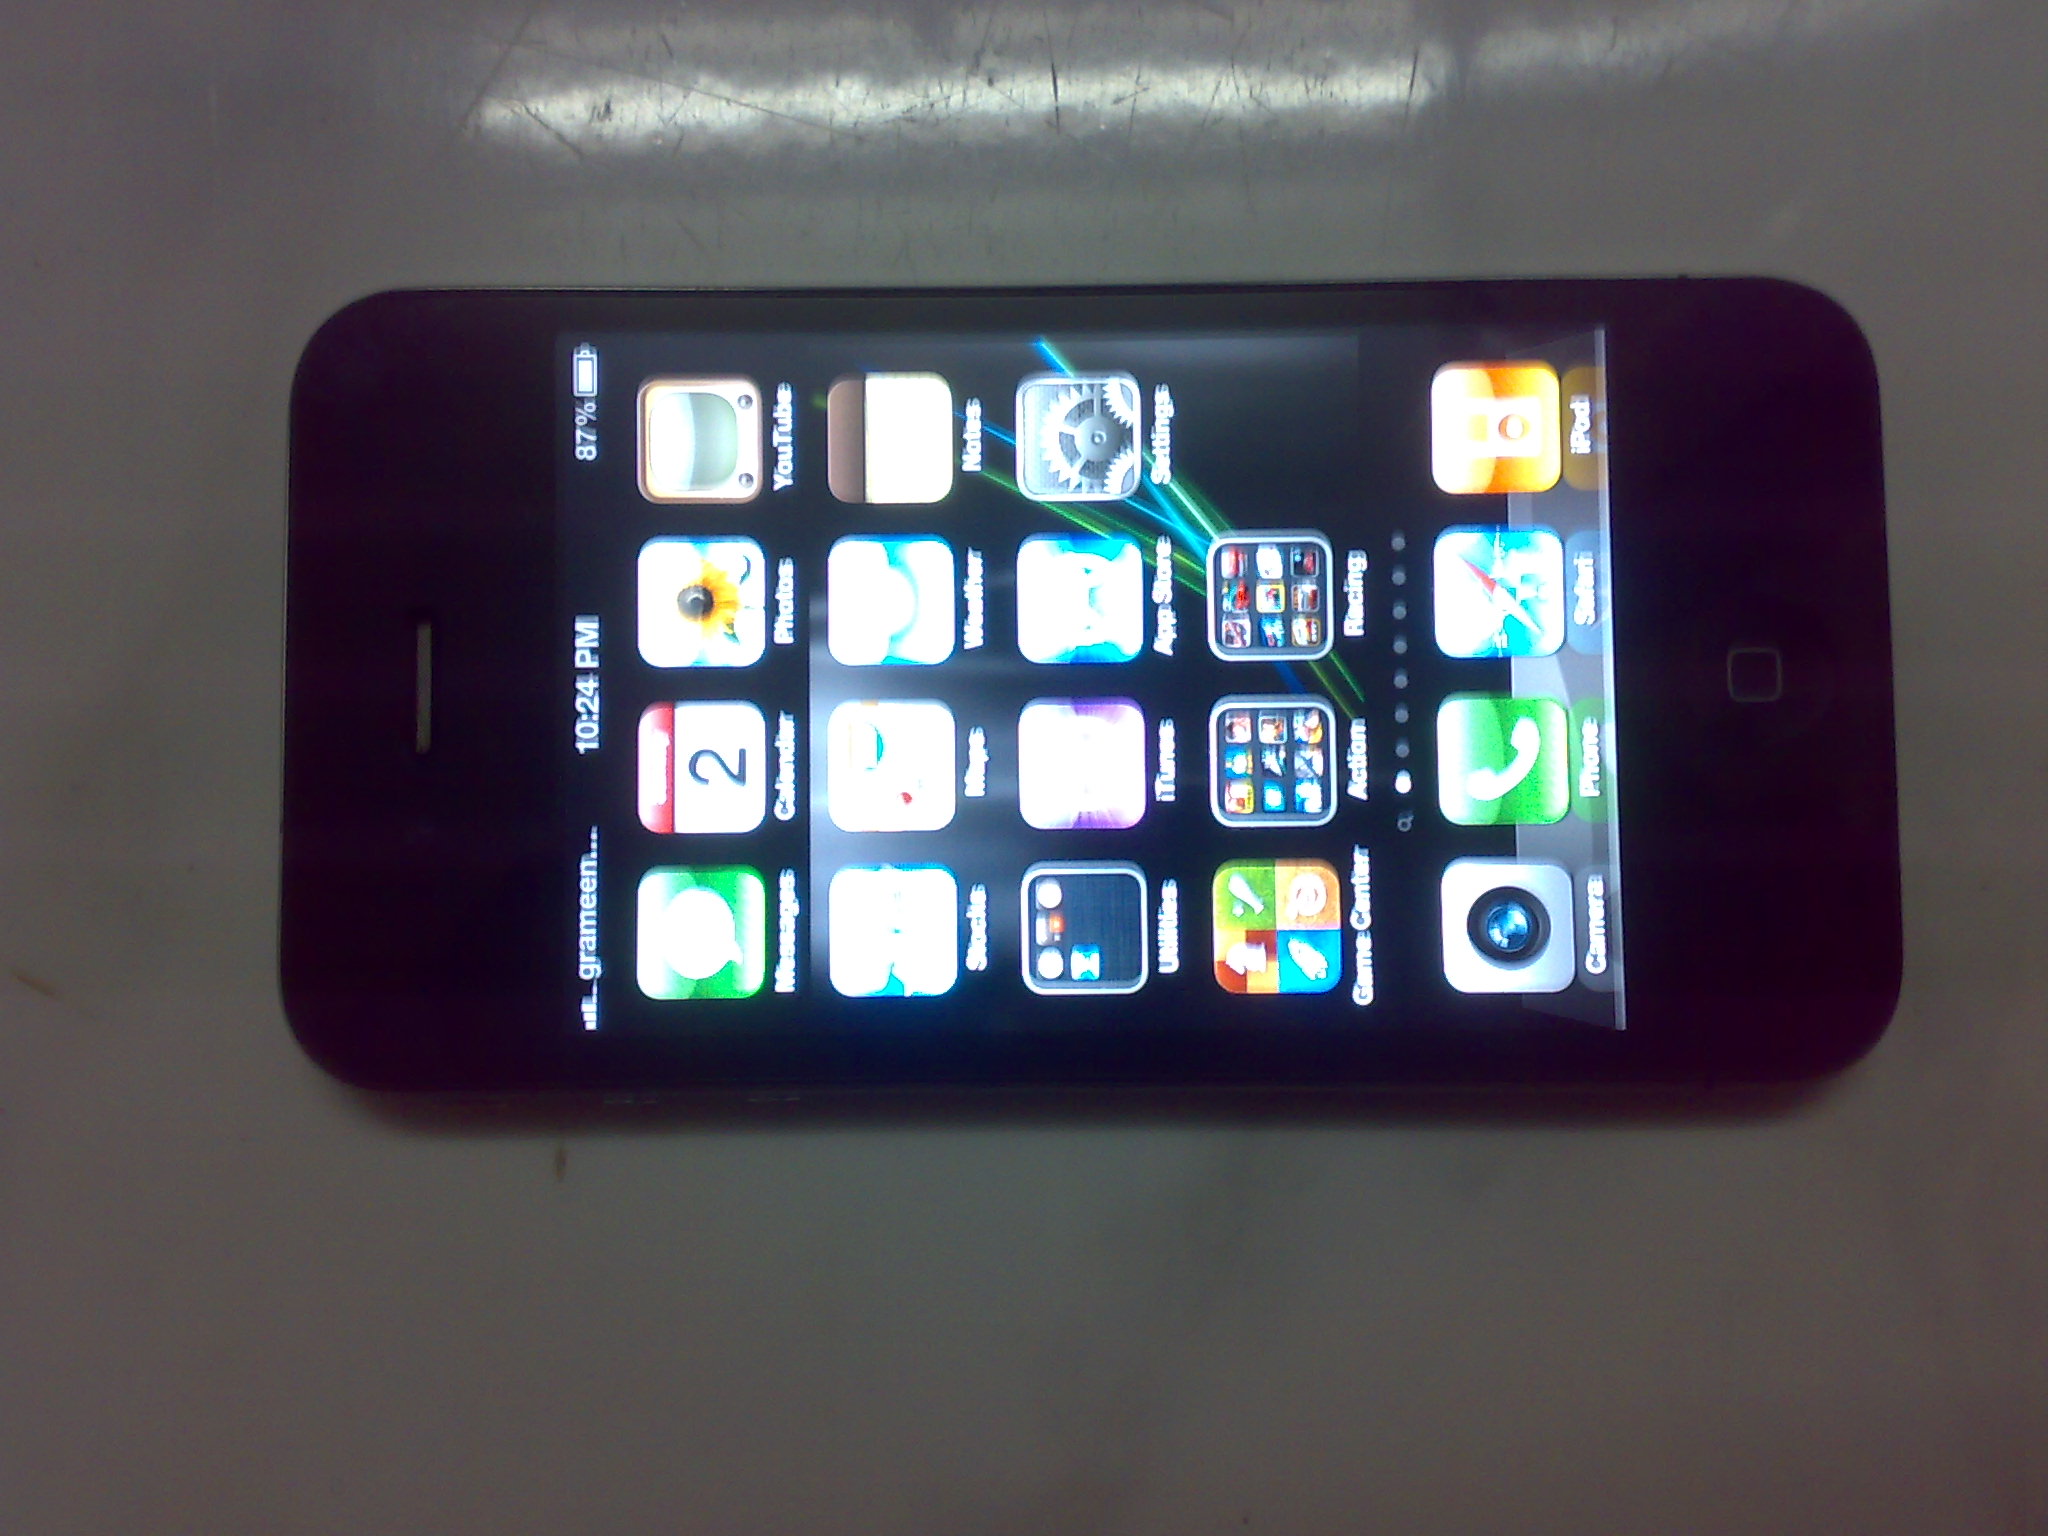 Iphone 4 32gb lowest price in clickbd large image 0